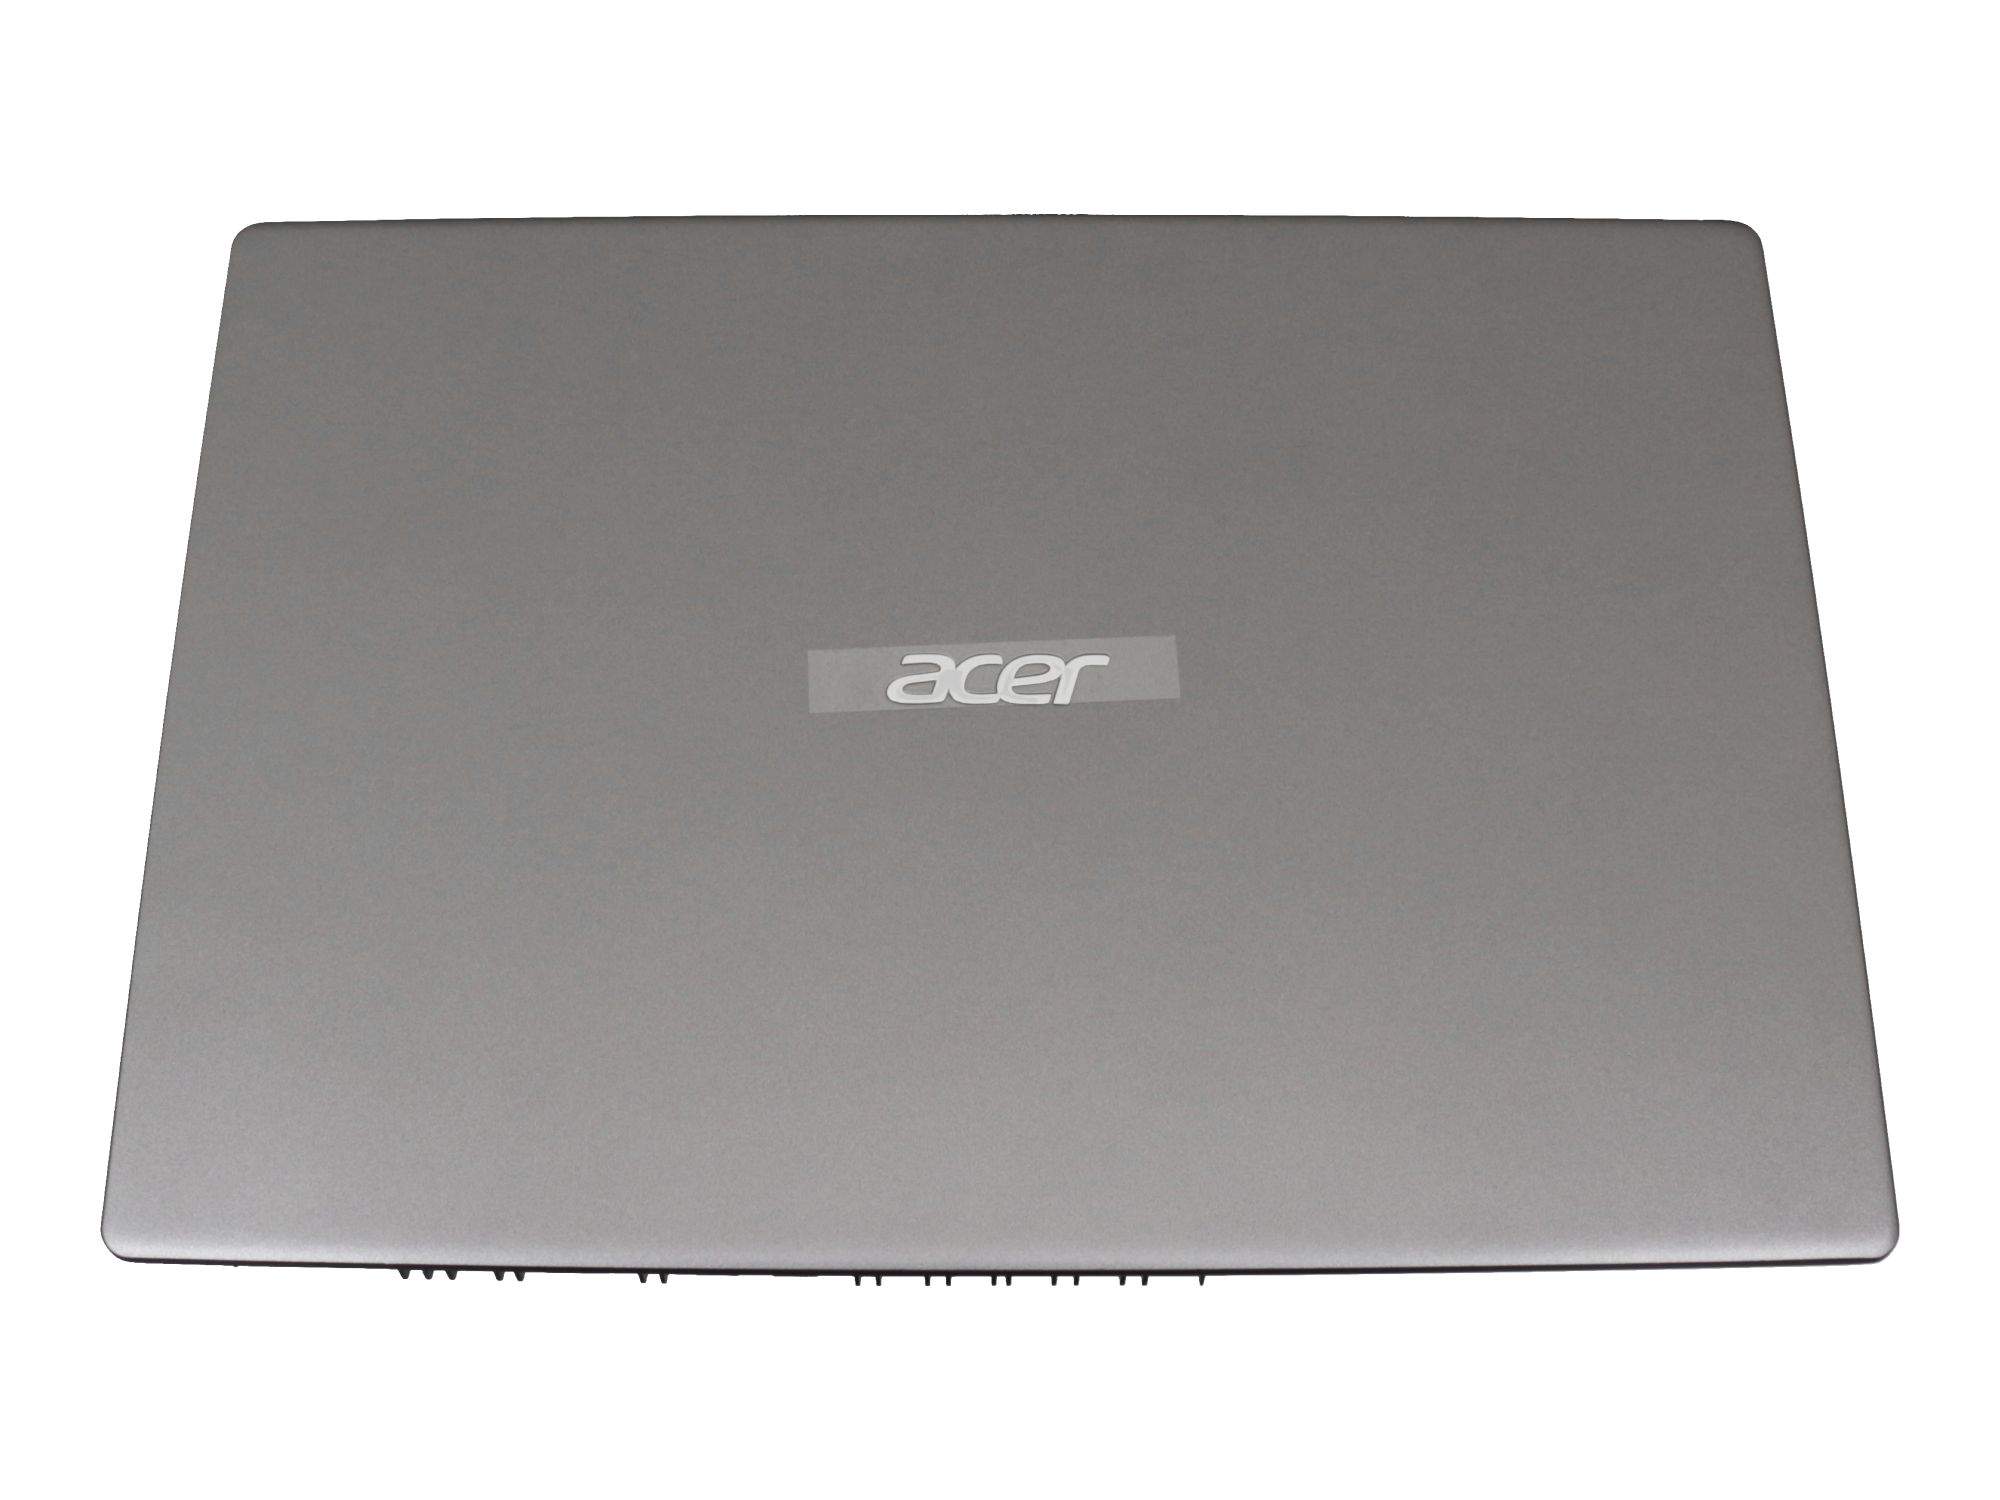 ACER COVER LCD GRAY W/LCD ADH*2